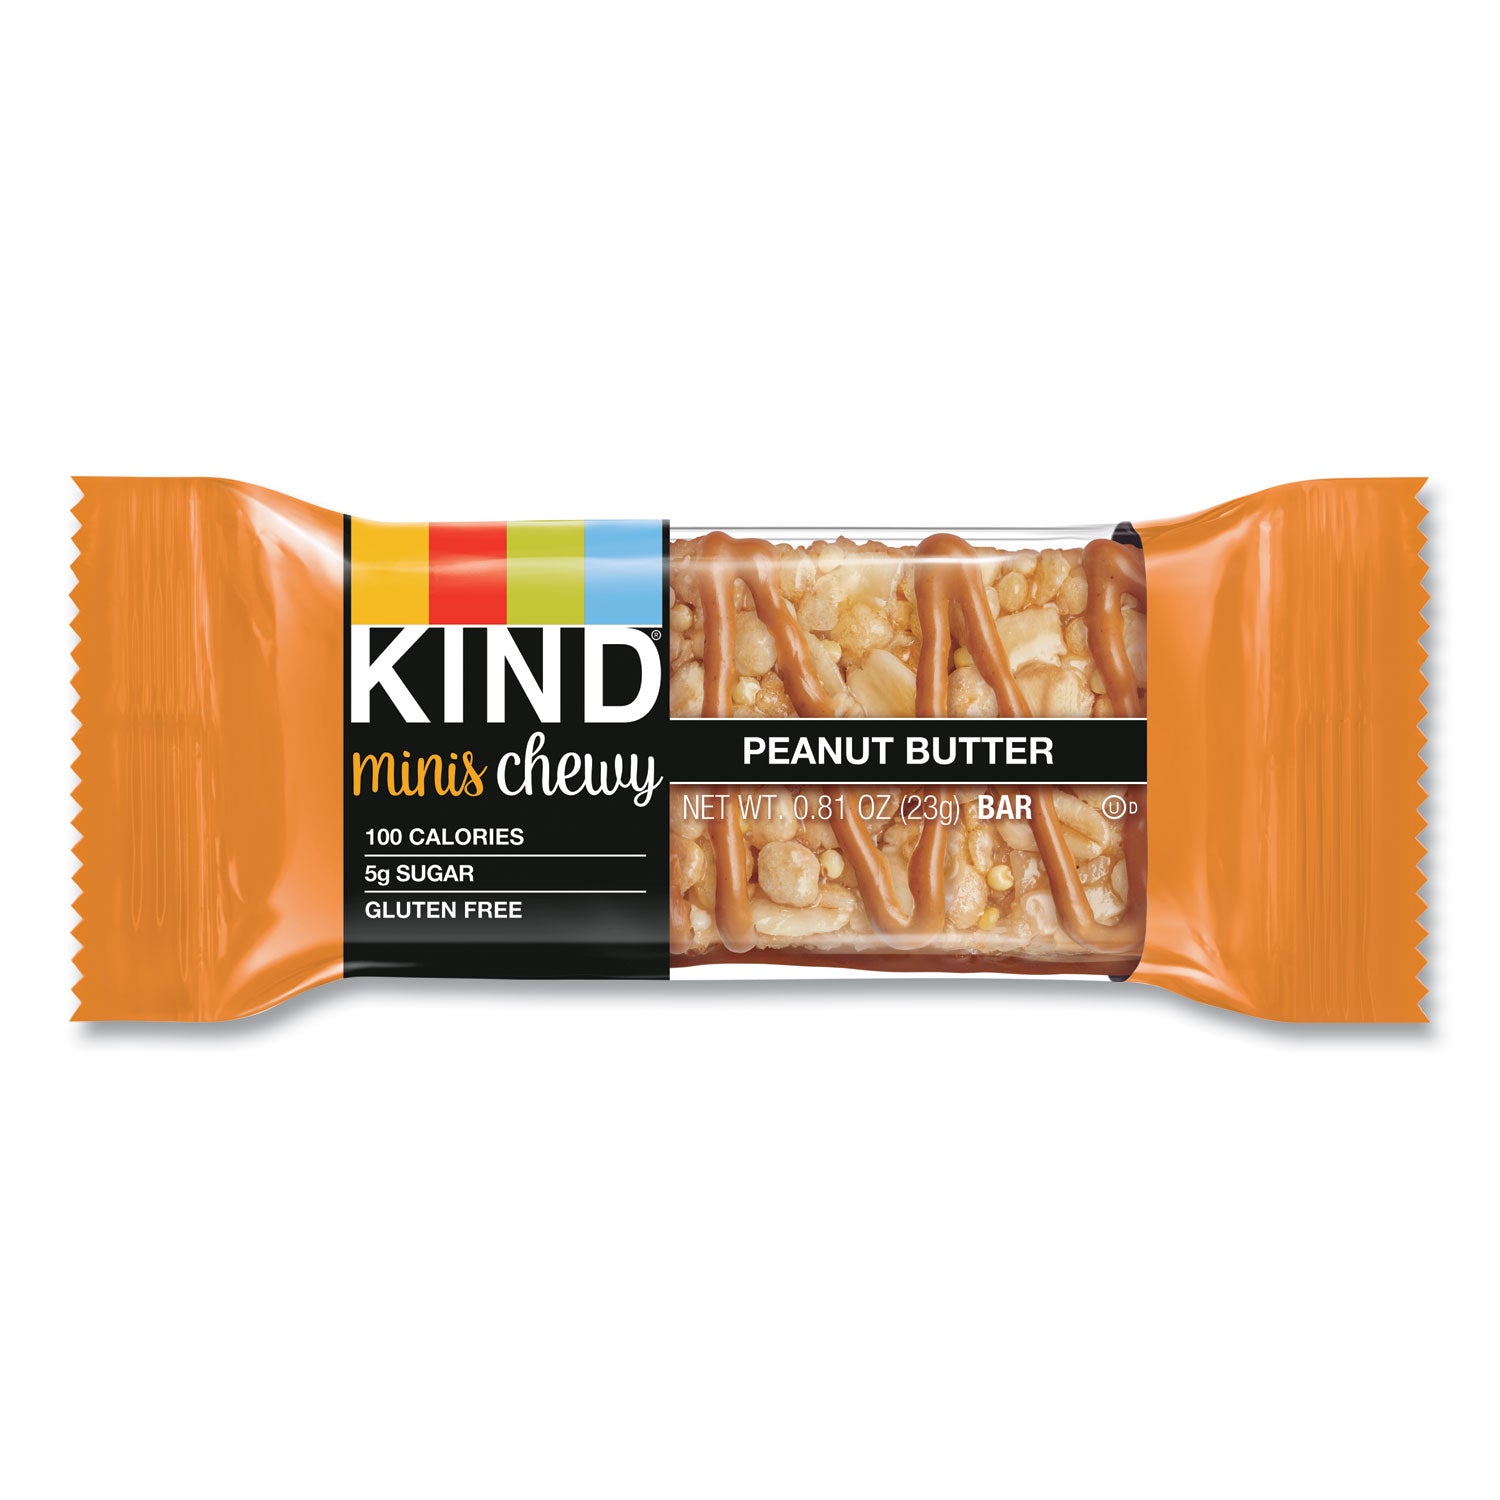 minis-chewy-peanut-butter-081-oz-10-pack_knd27895 - 2